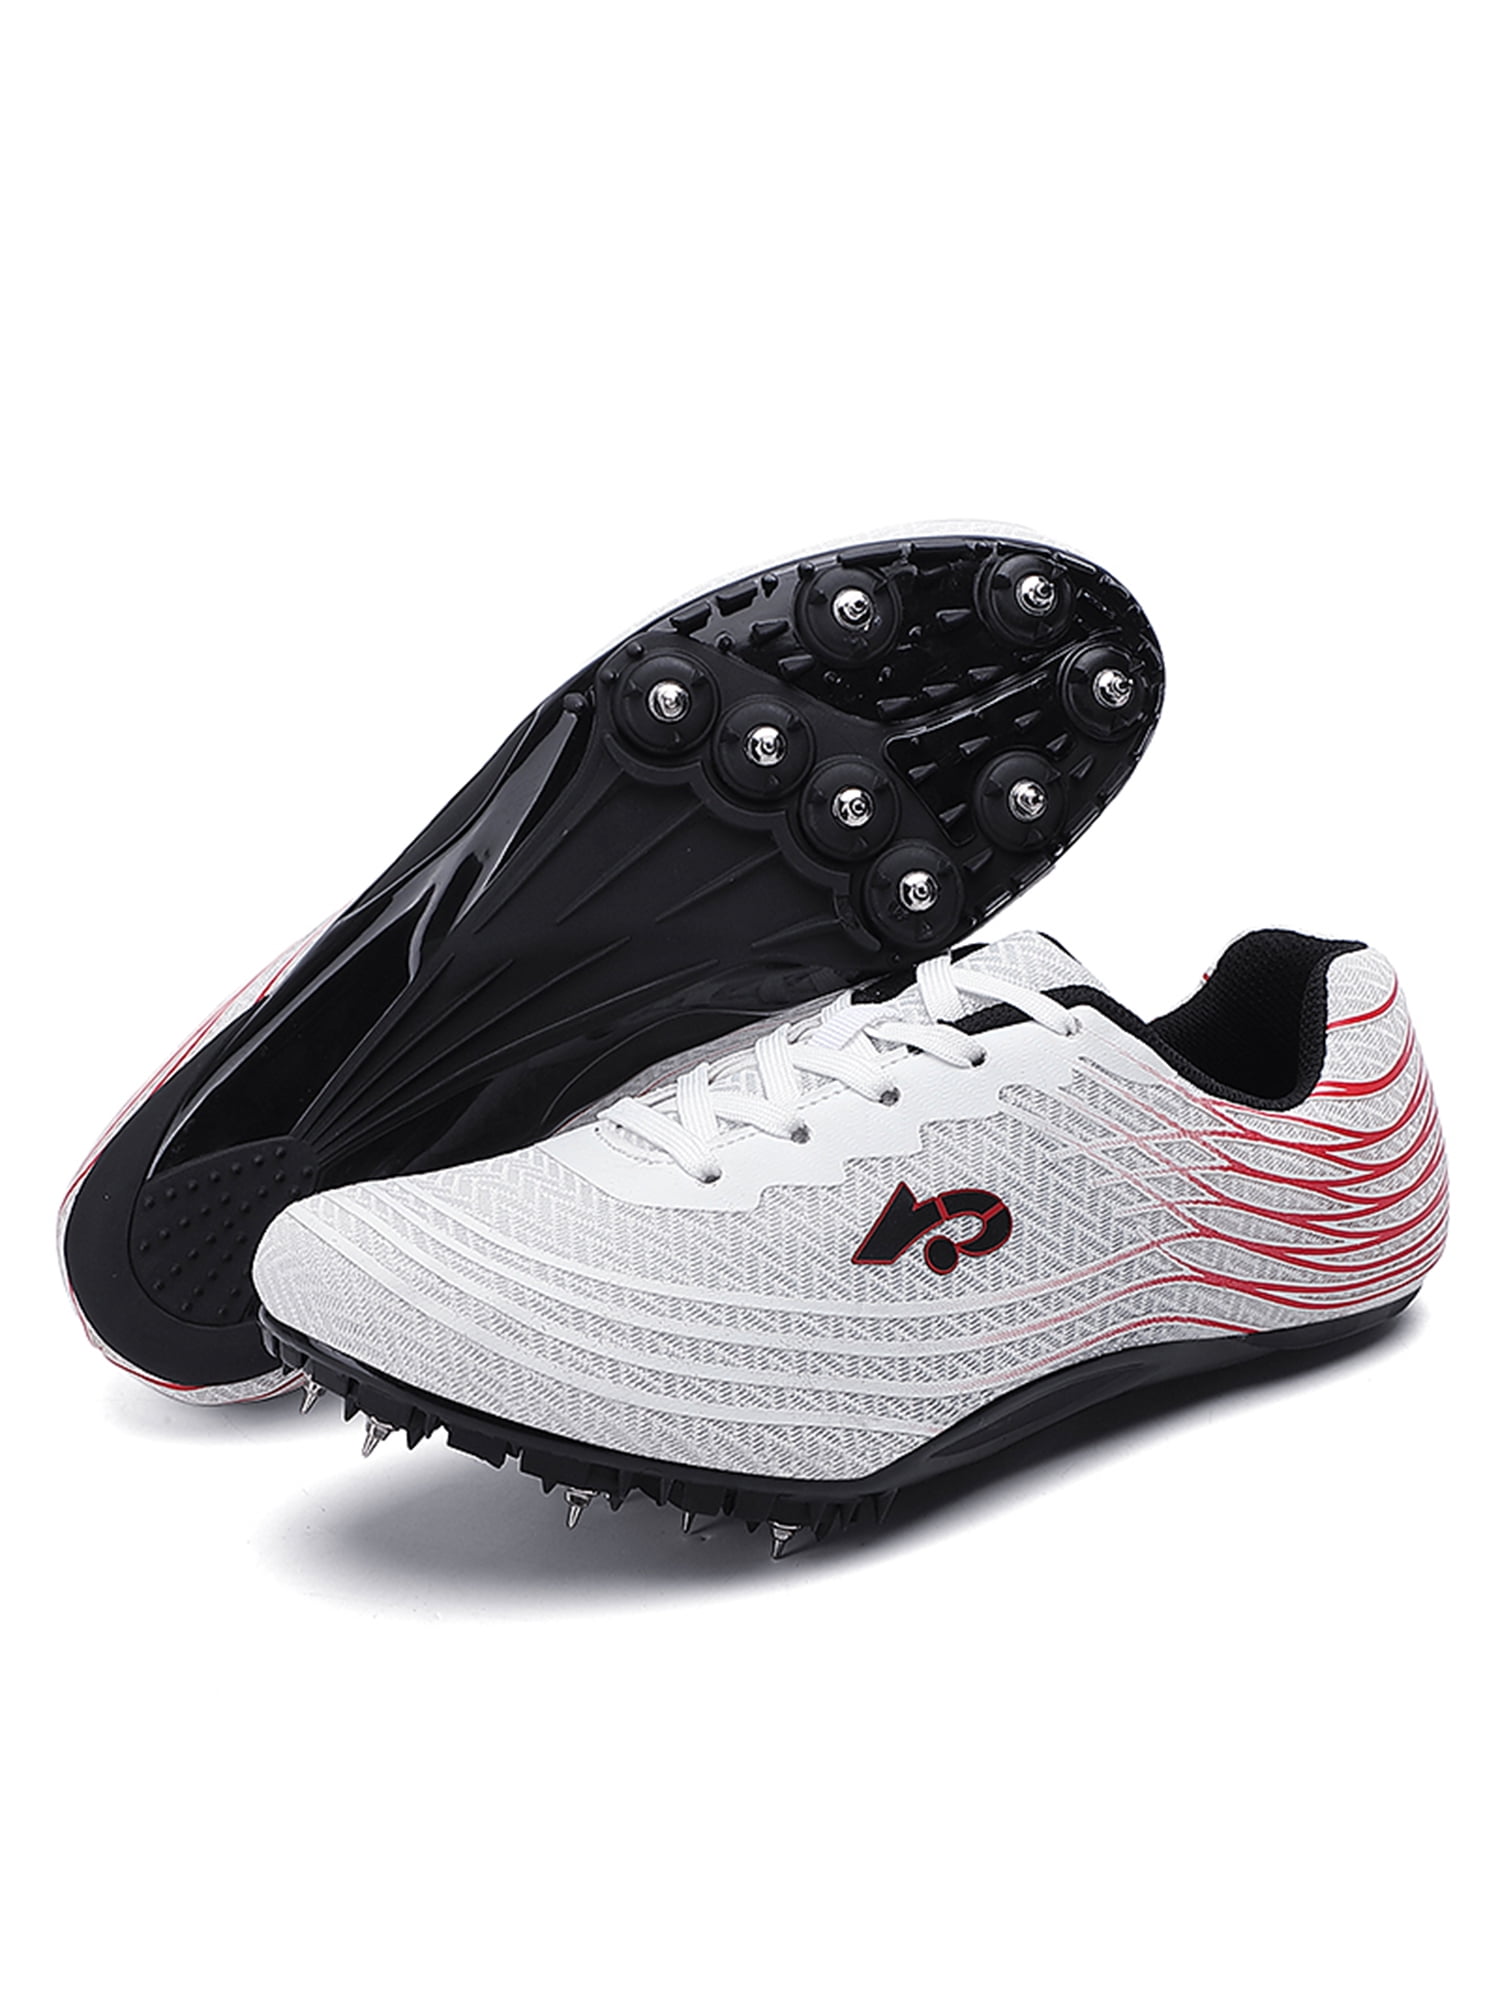 Track Spikes Super Store - Best Track Spikes | TrackSpikes.co